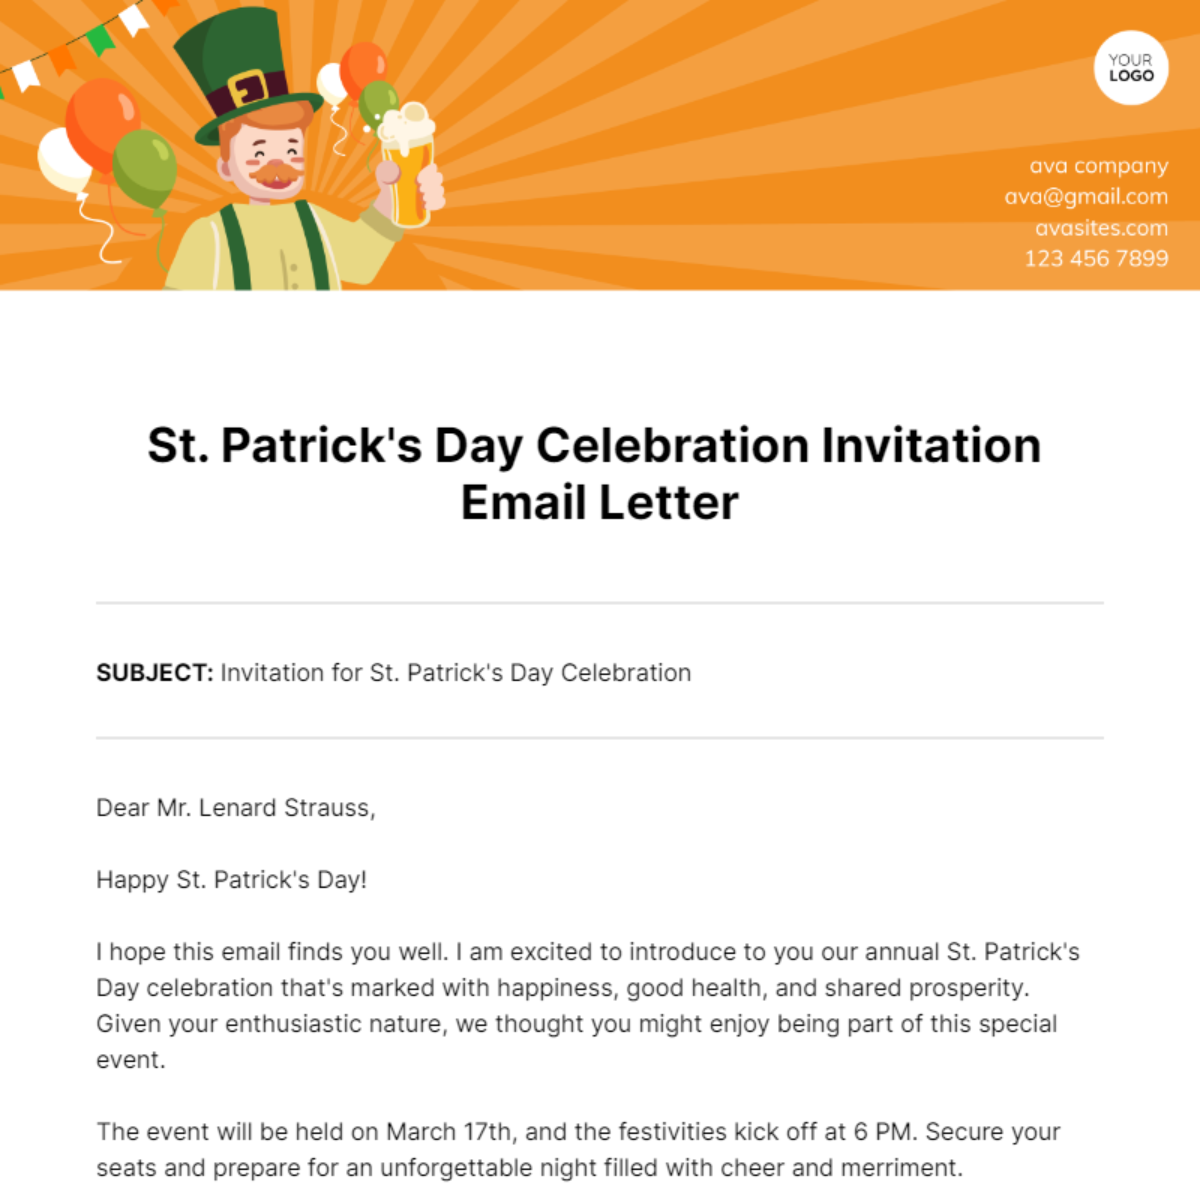 Free St. Patrick's Day Celebration Invitation Email Letter Template